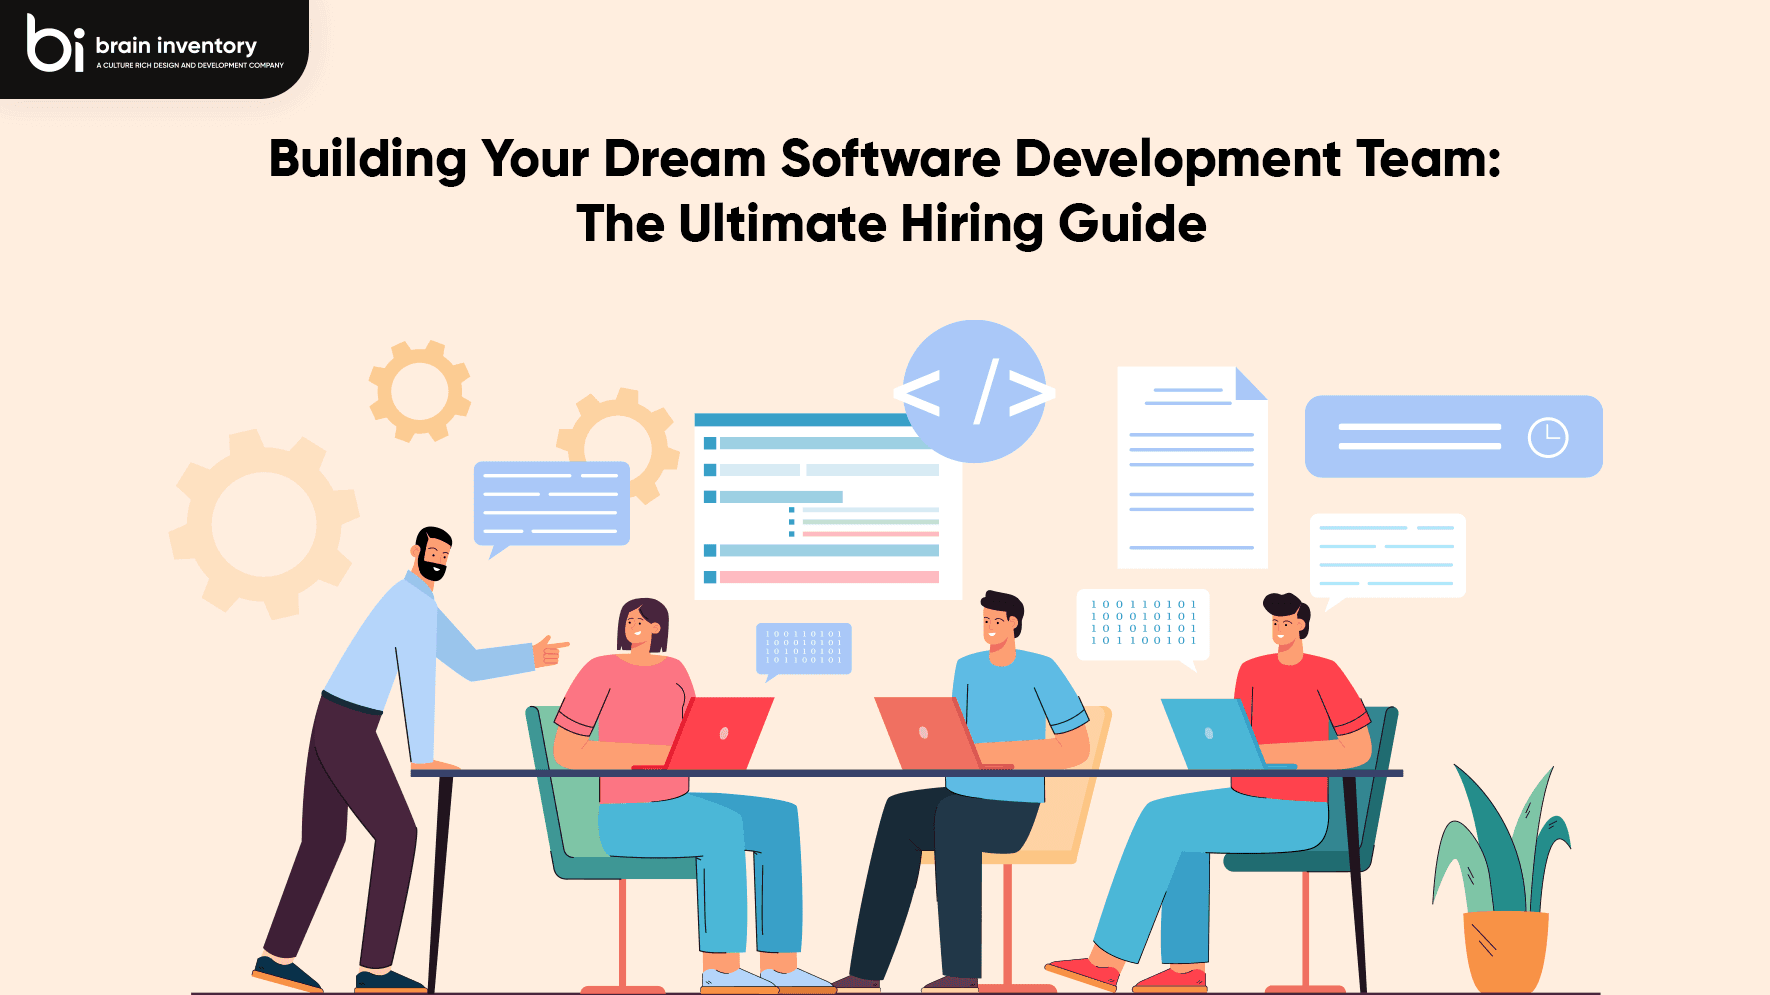 Building Your Dream Software Development Team: The Ultimate Hiring Guide